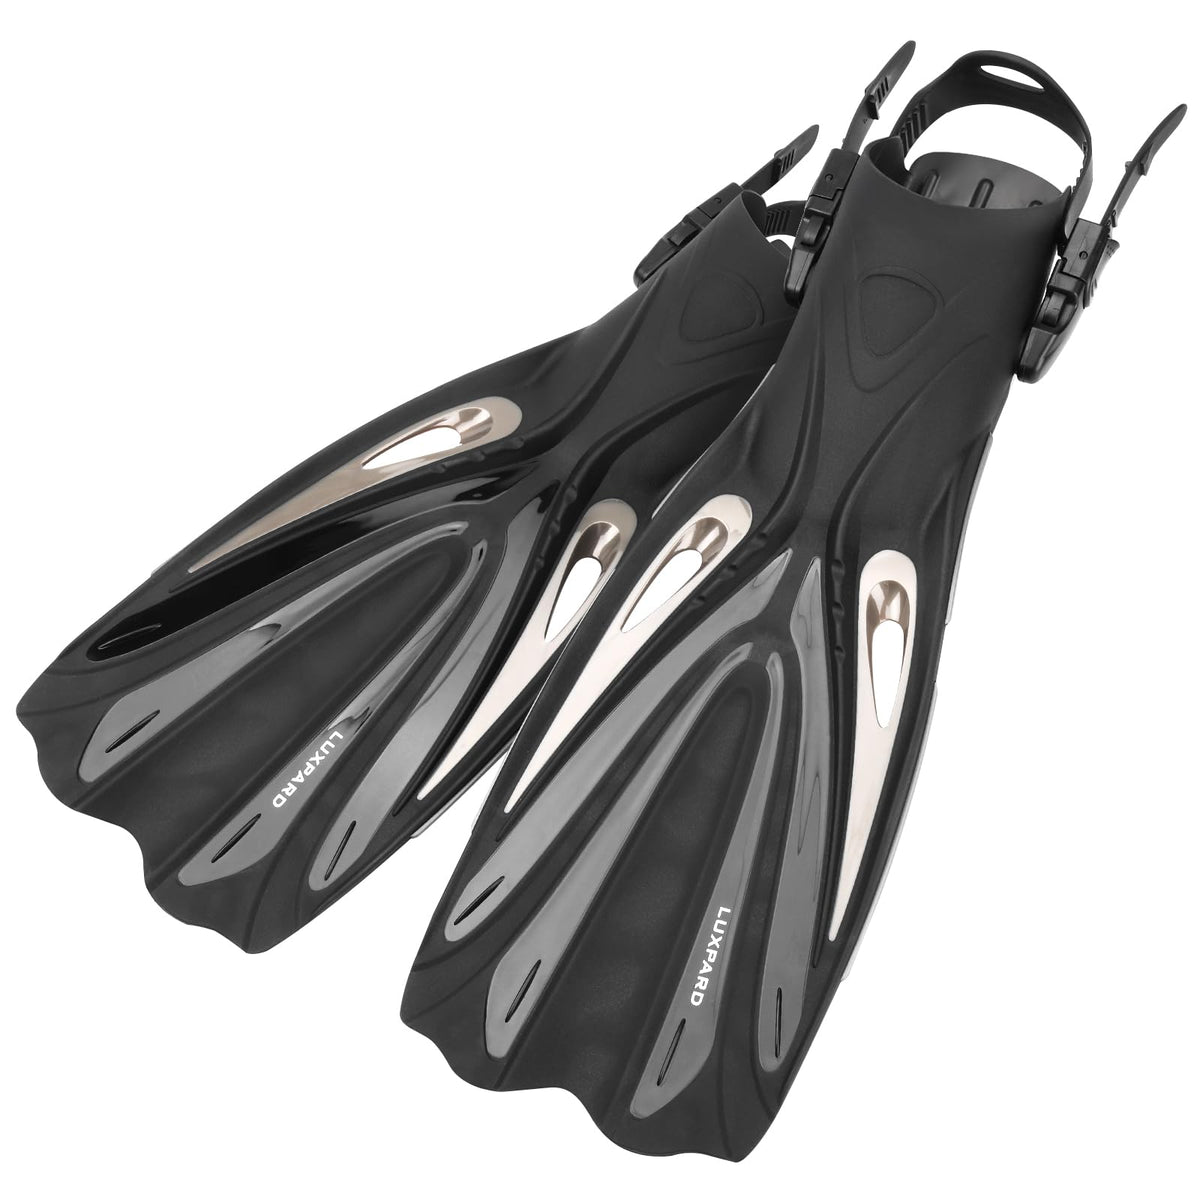 LUXPARD Diving Fins, Powerful Efficient Open Heel Scuba Diving Fins, Flippers for Snorkeling and Freediving with Adjustable Buckles